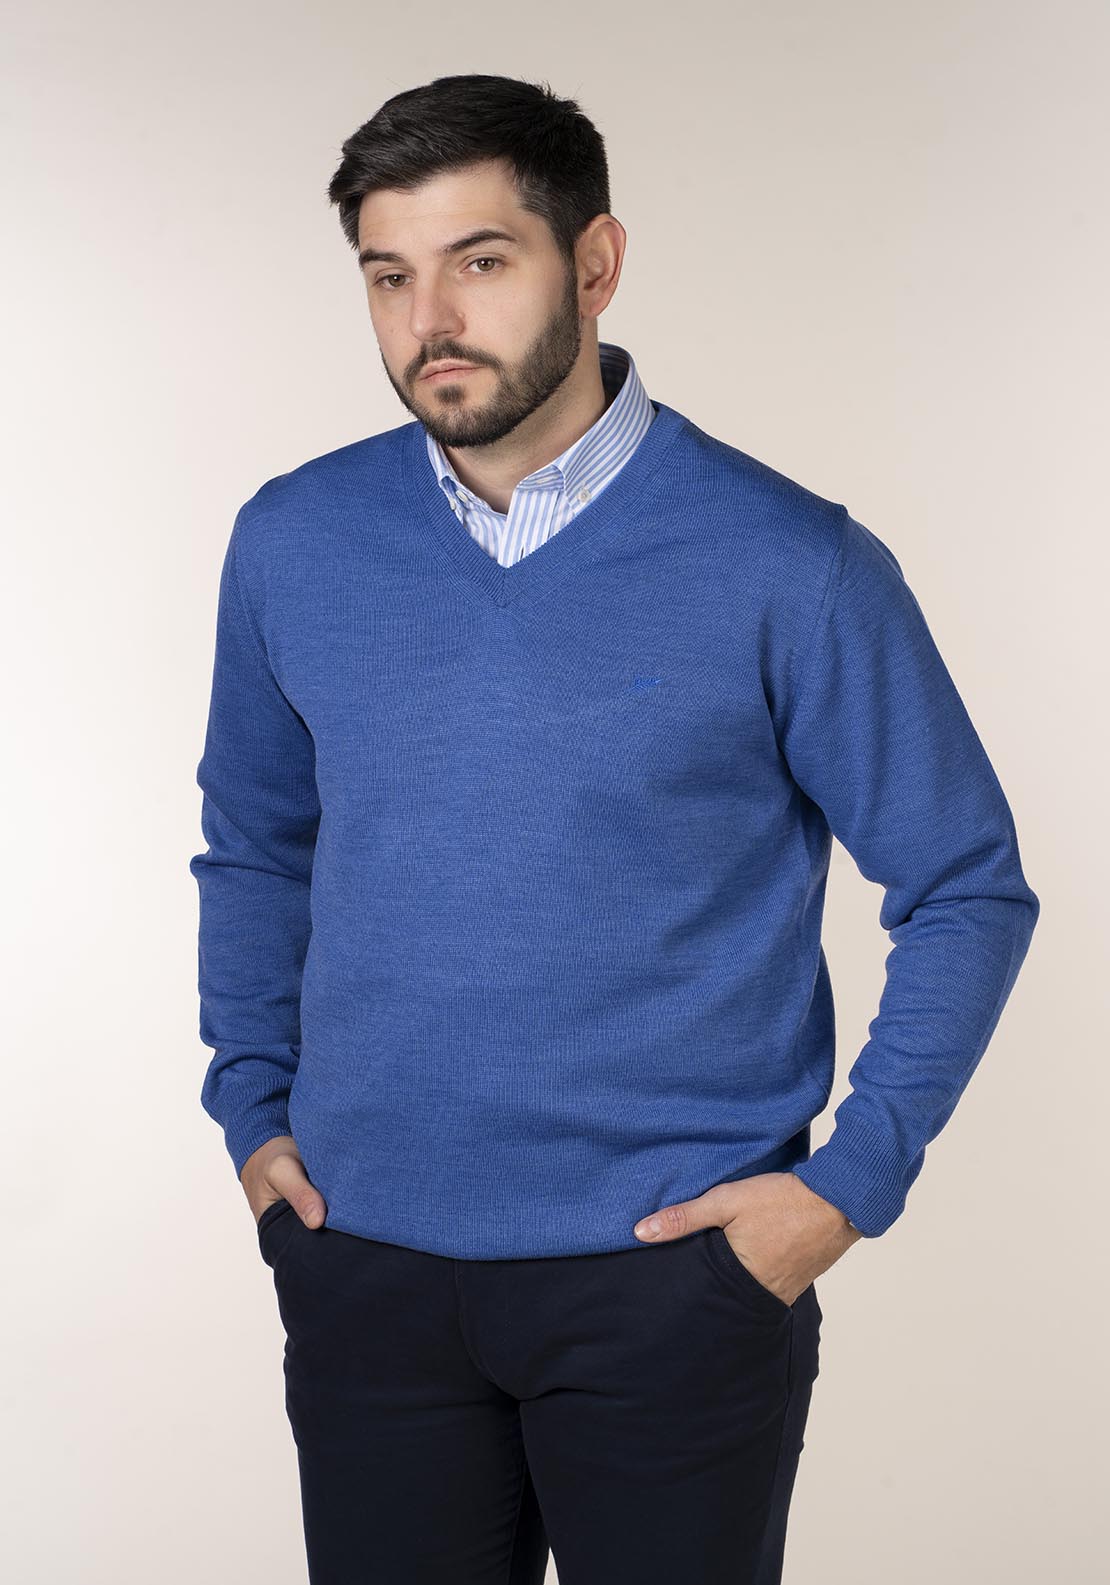 Yeats Mens 100% Cotton V-Neck Jumper 2 Shaws Department Stores